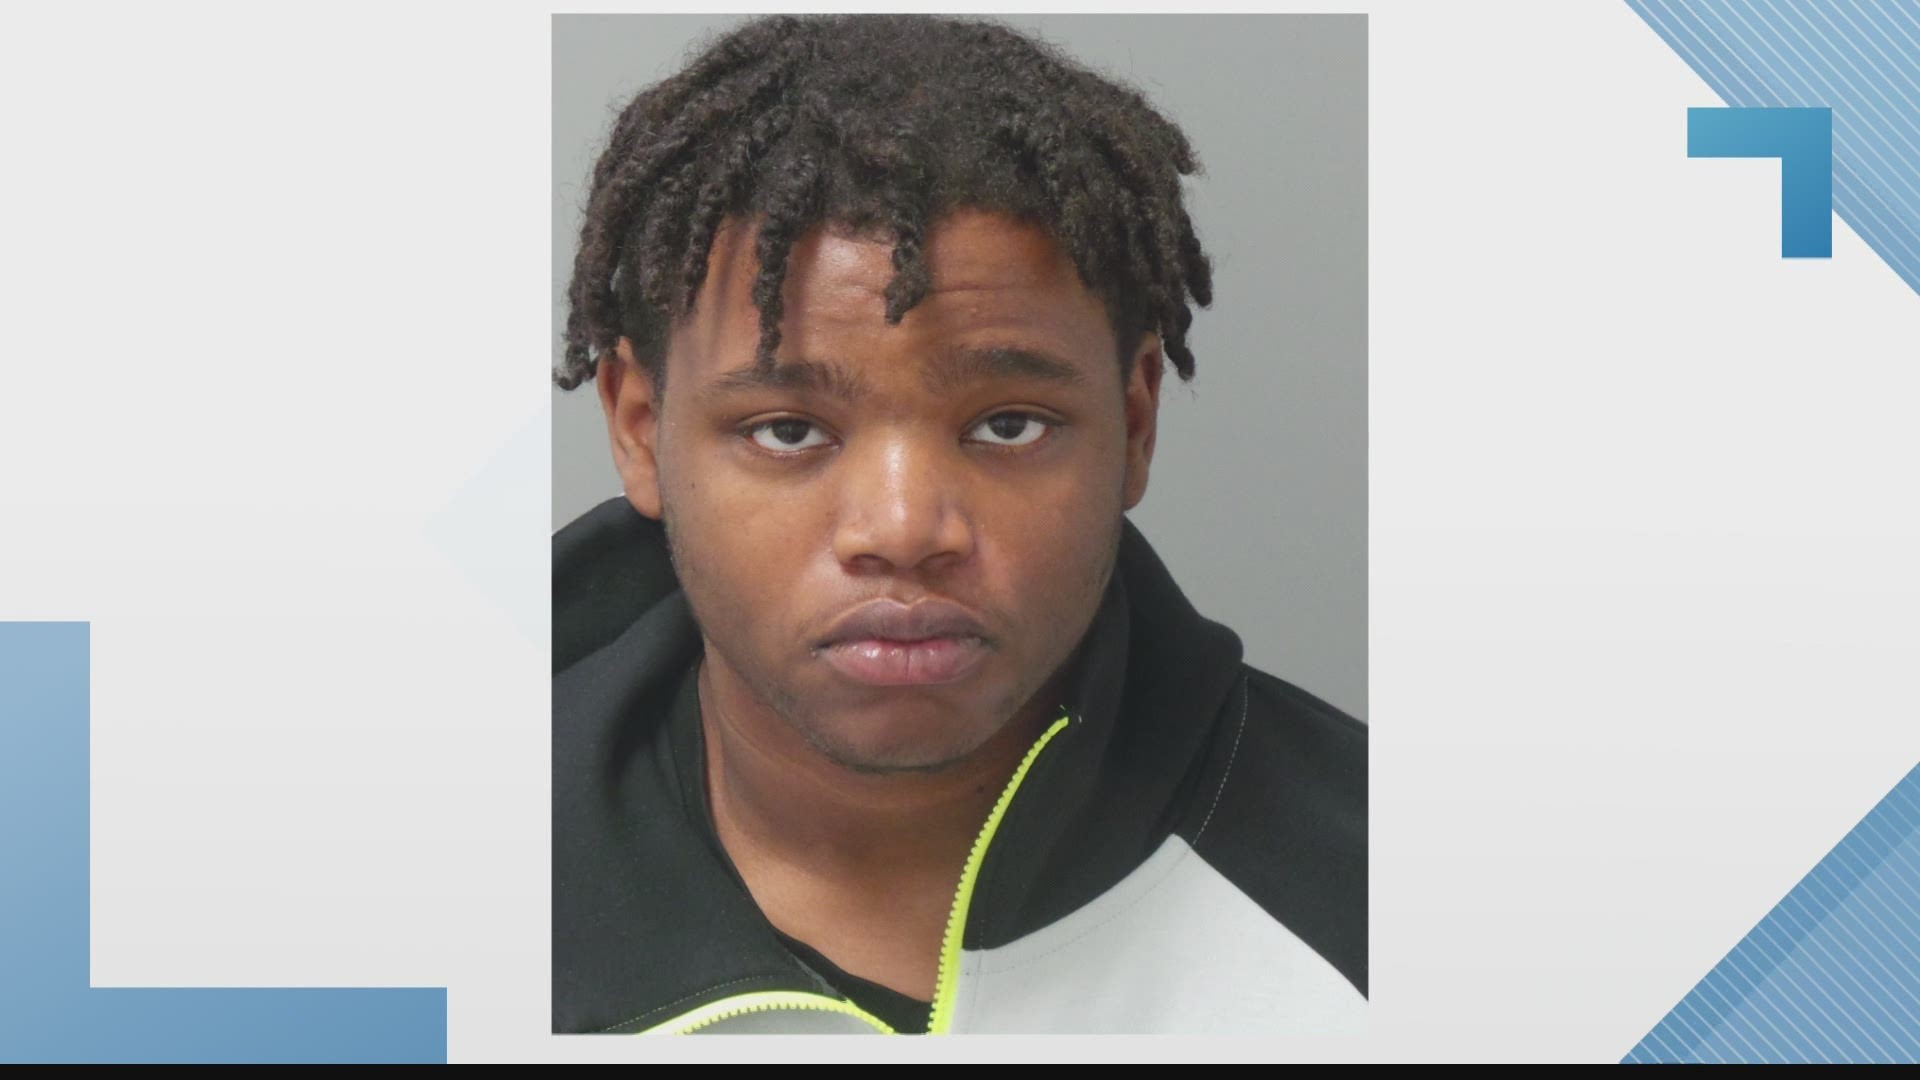 Kyri Morgan of St. Louis has been charged with second-degree burglary. His bond was set at $10,000